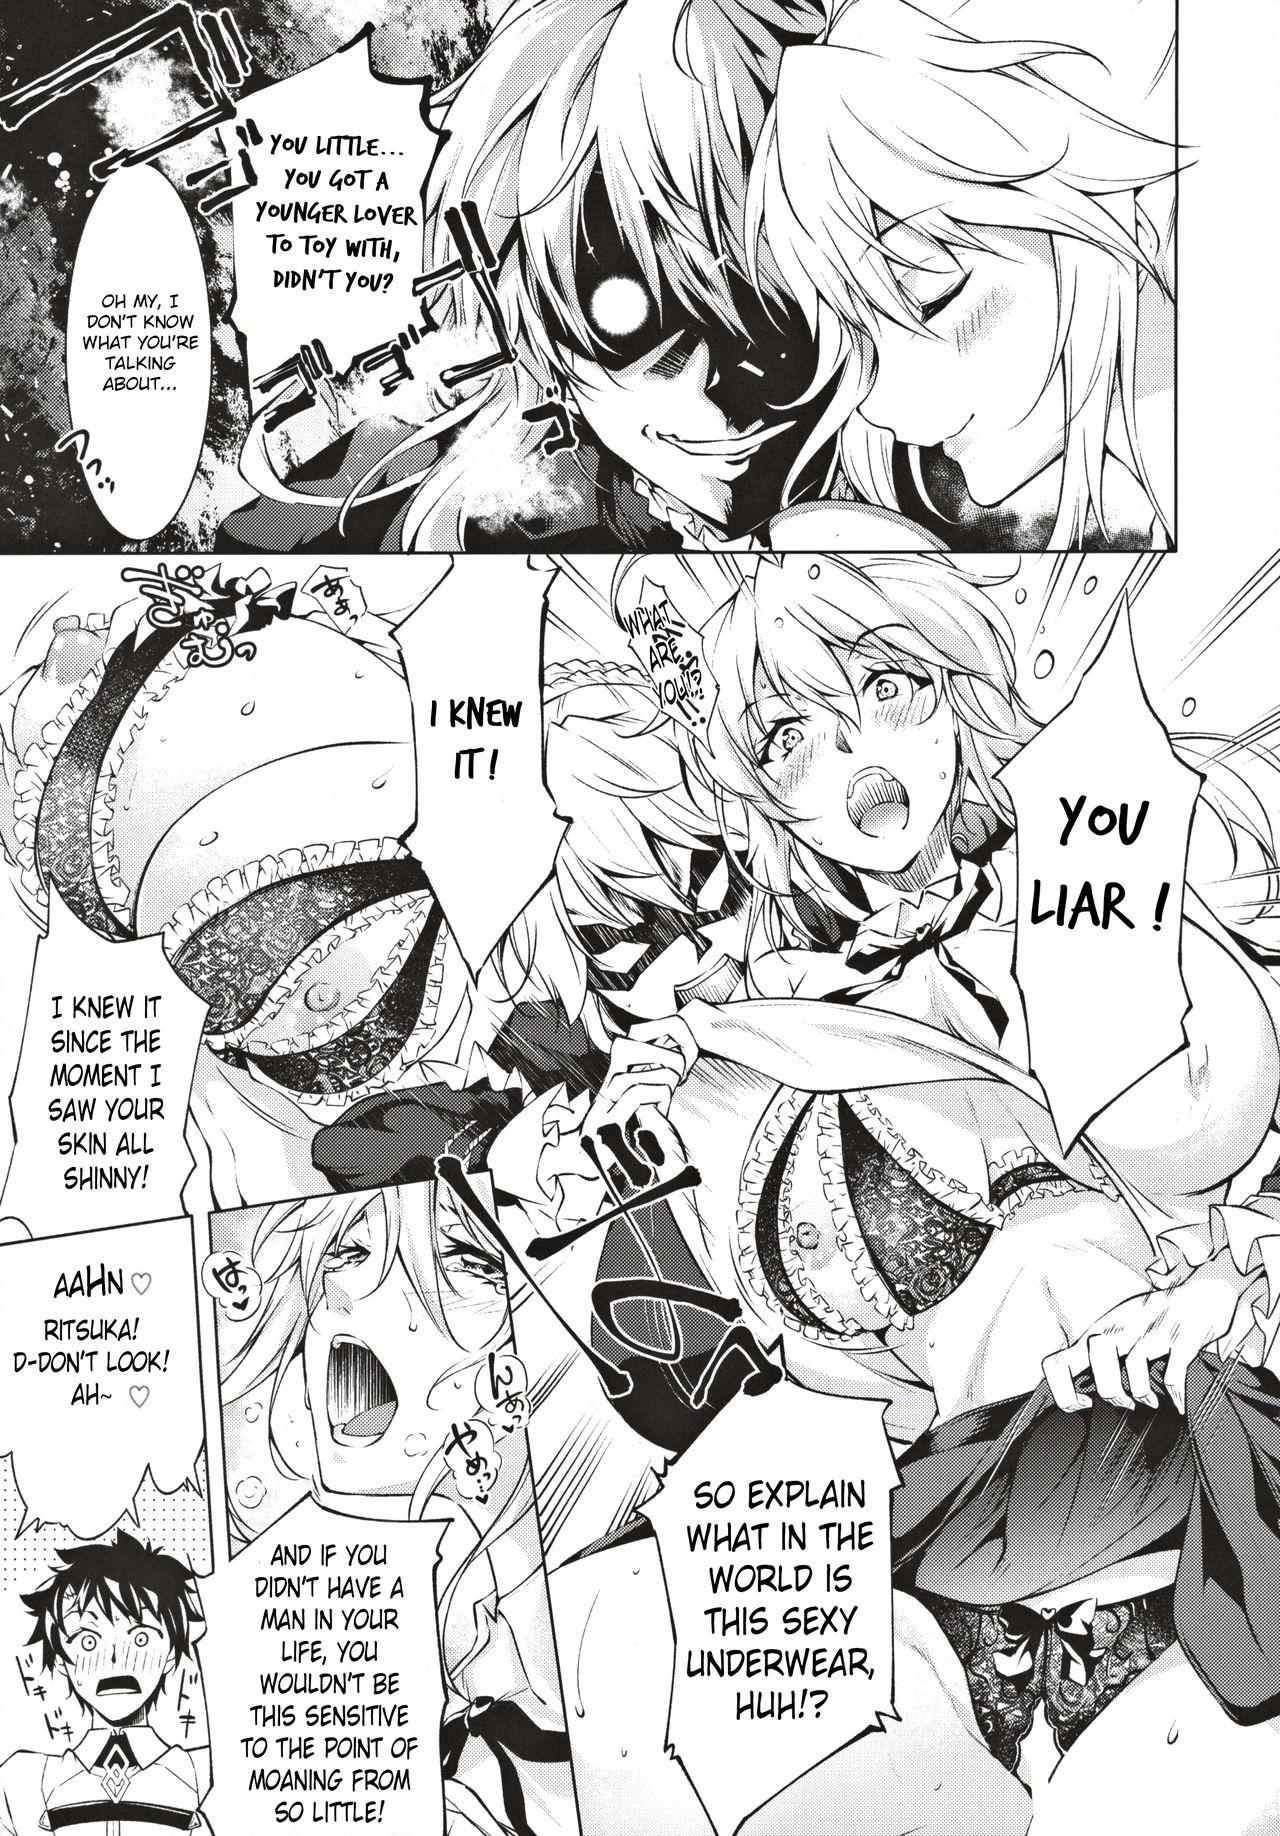 Group Sex Pendra Shimai no Seijijou | The Pendragon twin sisters' sexual situation - Fate grand order Gay Boyporn - Page 6